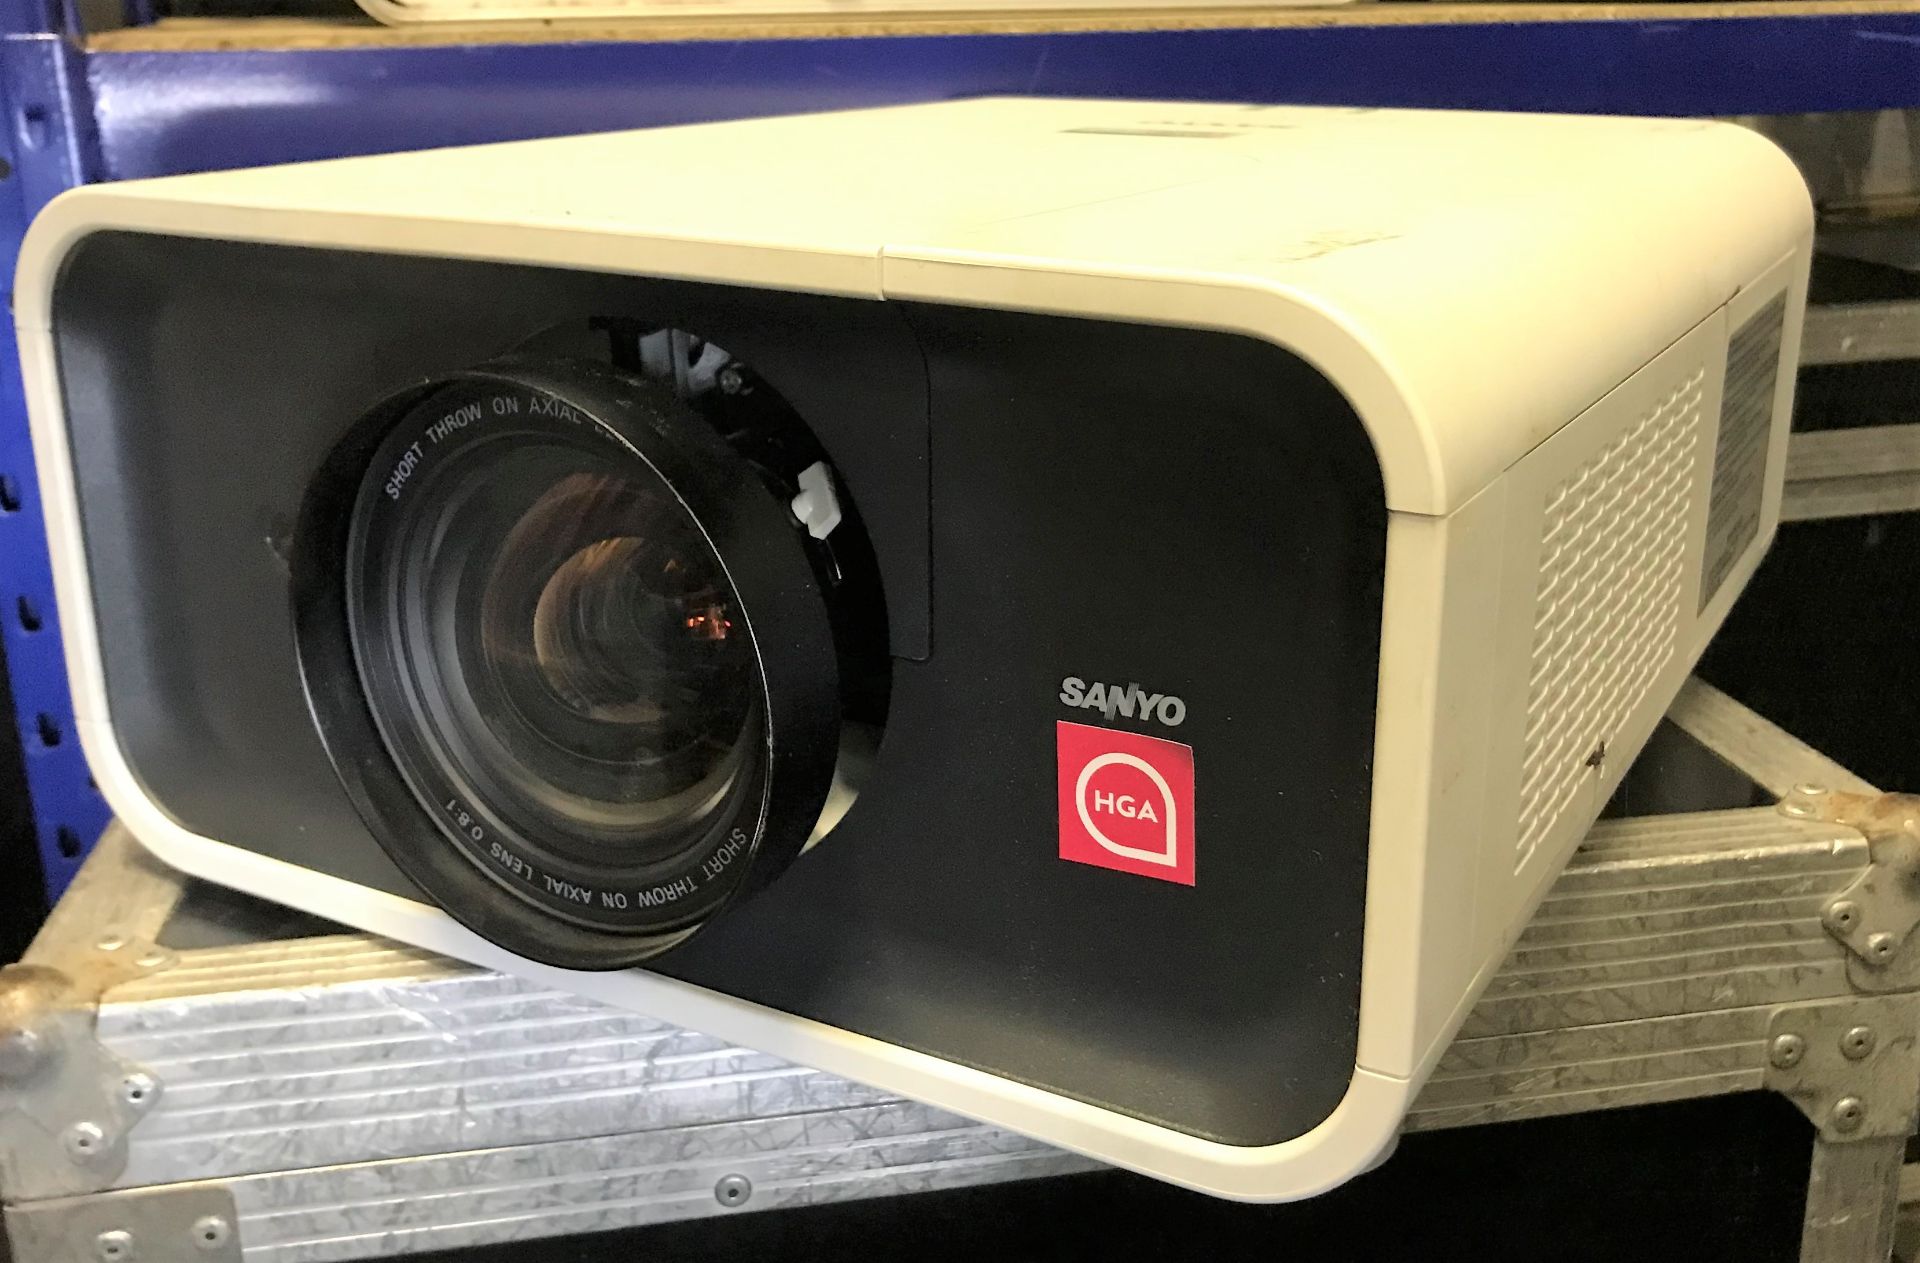 A Sanyo PLC-XP100L PROxtraX Multiverse Projector No.G1311125 with Short Throw On Axial Lens, 0.8:1